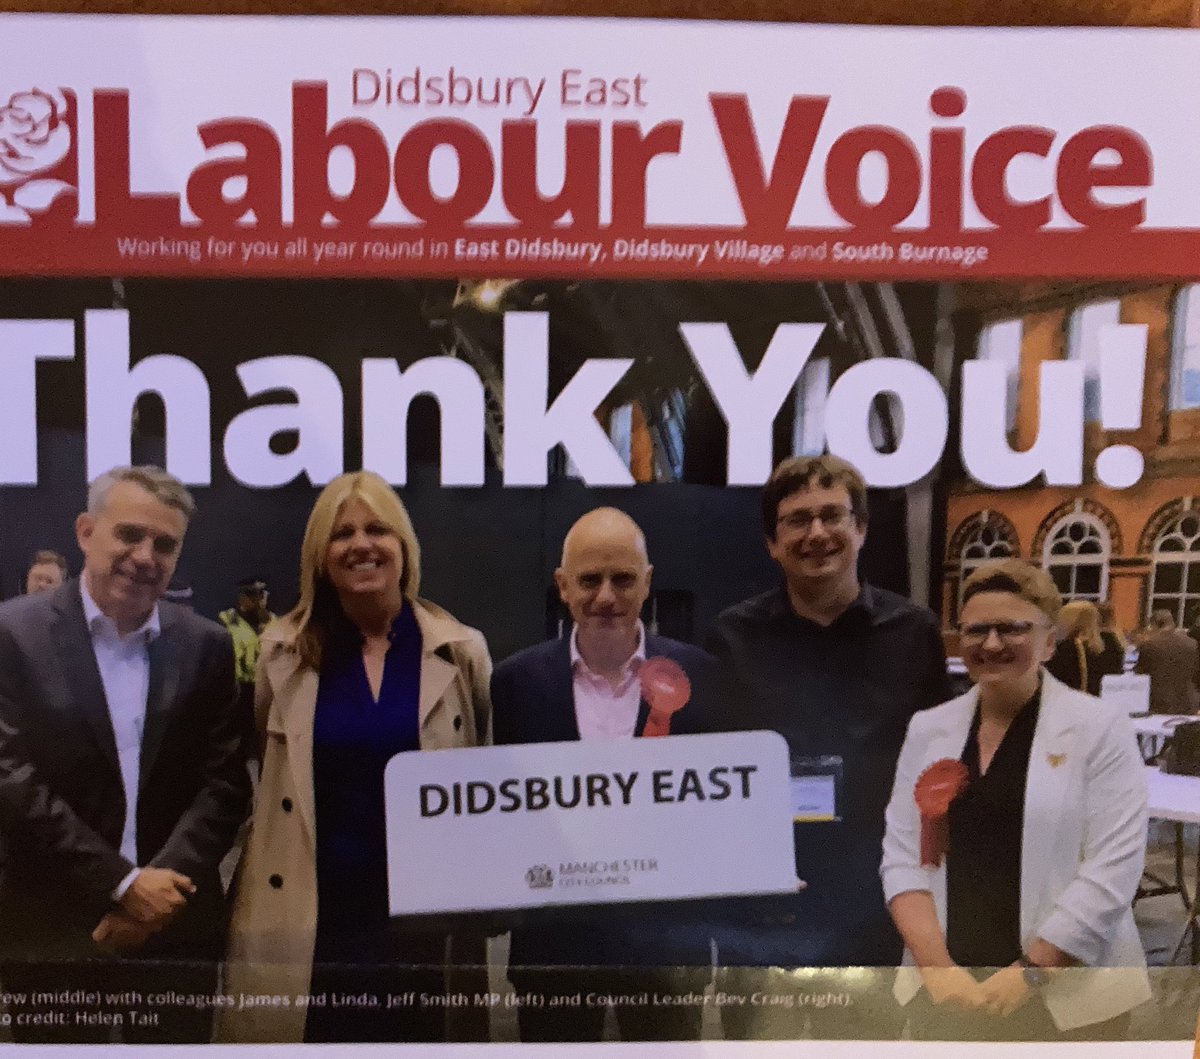 Watch out for the latest Labour Voice on your doorstep. @Andrew4Didsbury @LindaFLabour @JeffSmithetc @bevcraig Includes good news about a clampdown on speeding on Kingsway, opposition to Parrswood development plans and an update about the Metrolink extension to Stockport.